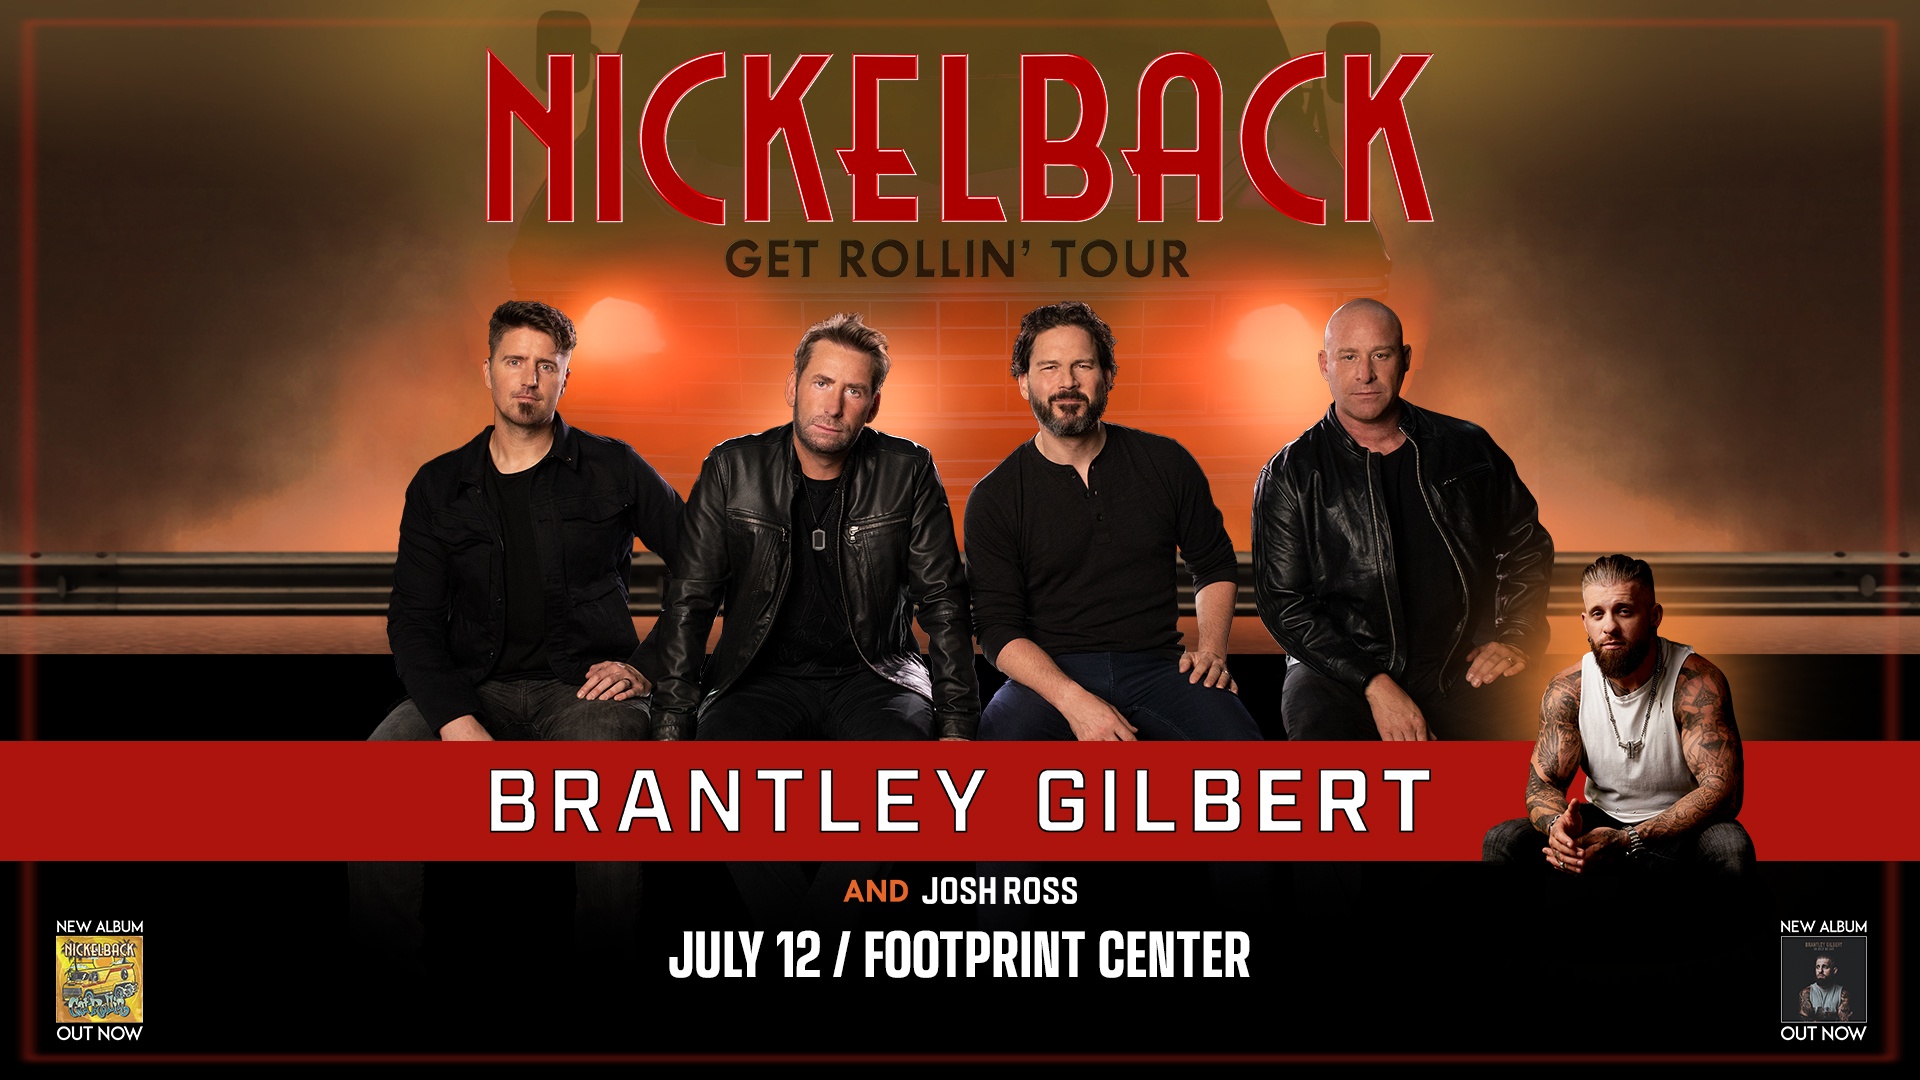 Nickelback - Get Rollin' Tour | Brantley Gilbert and Josh Ross | July 12, 2023 at 6:30pm at Footprint Center